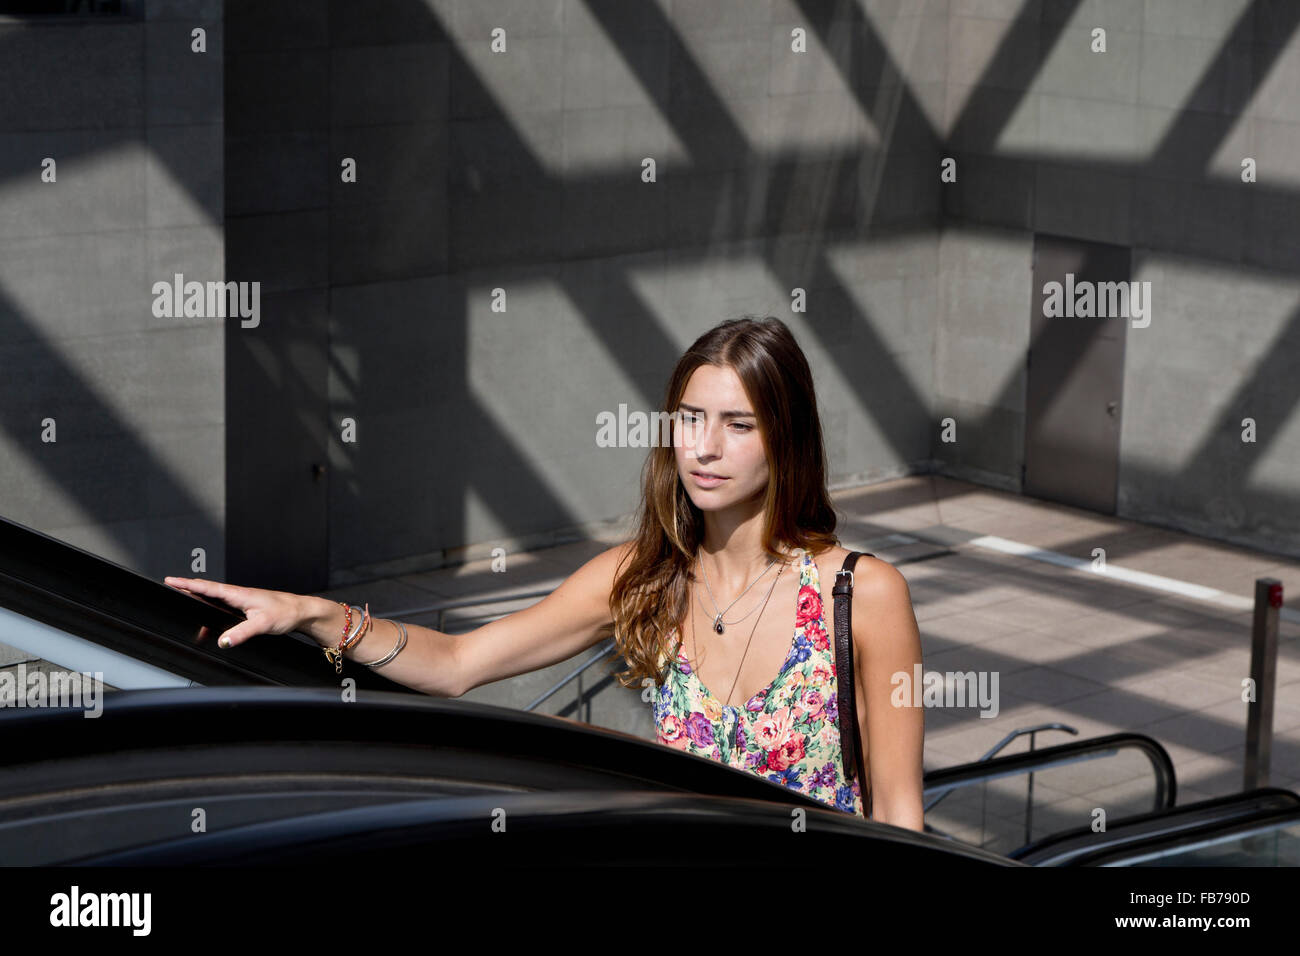 Young woman on escalator Banque D'Images